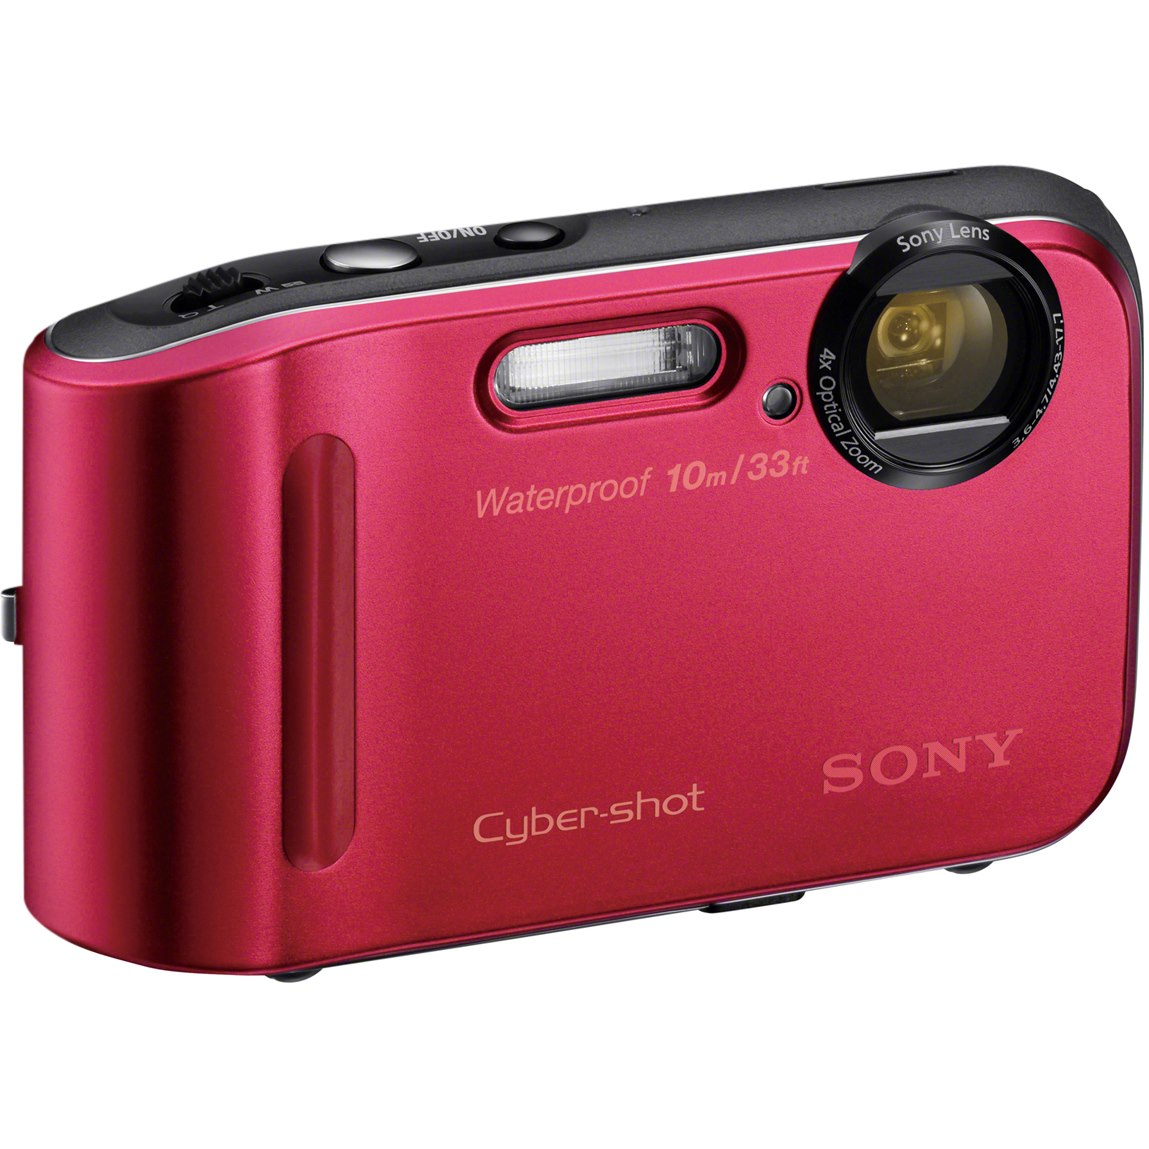 Sony Cyber-shot DSC-TF1 16.1 Megapixel Compact Camera - Red